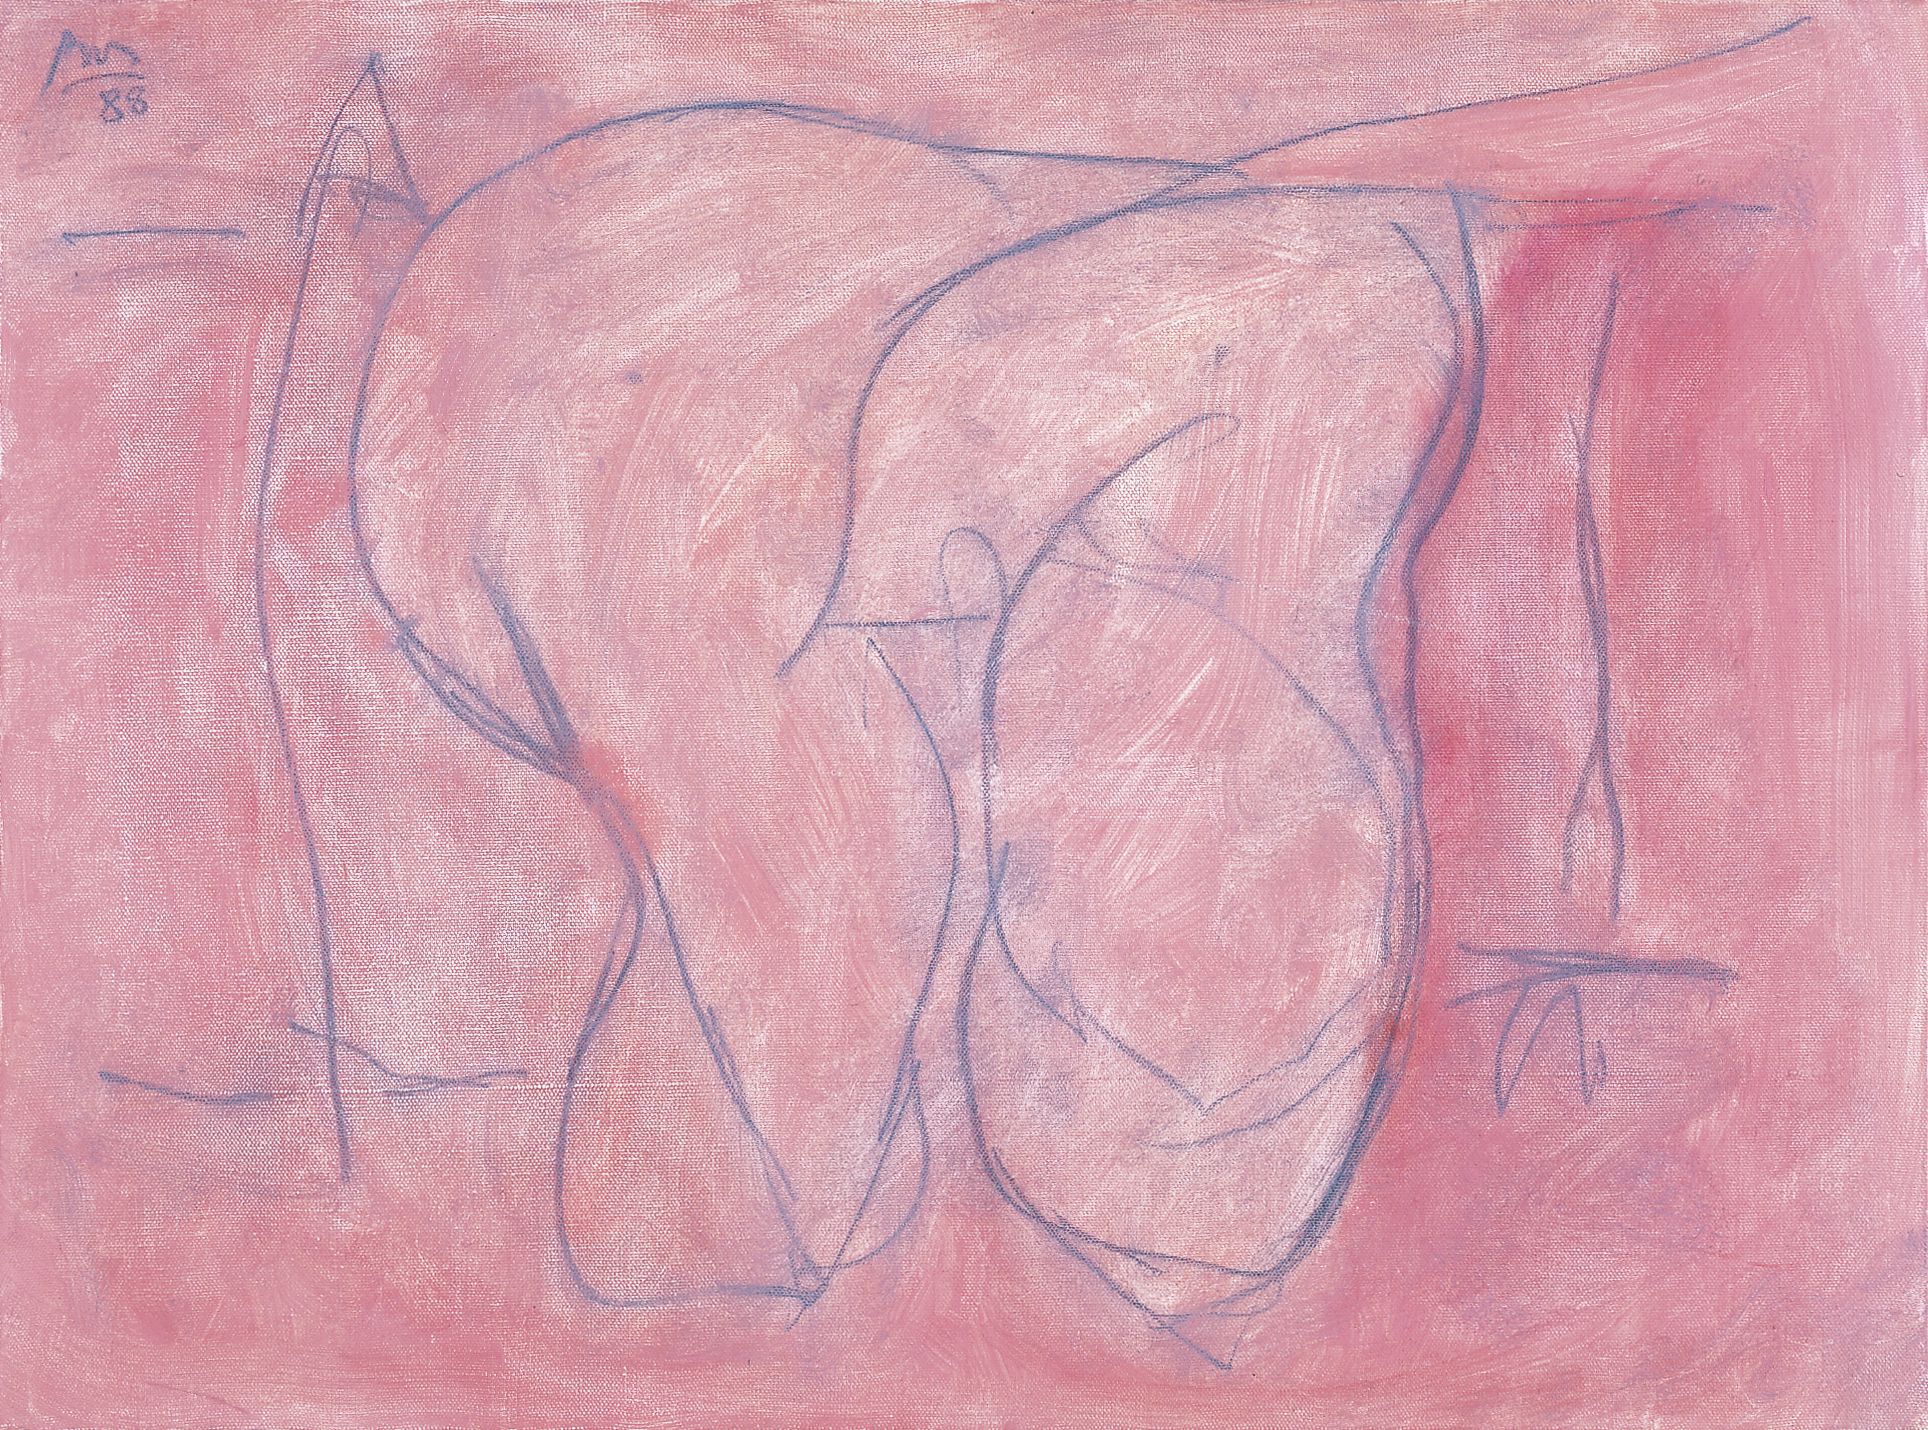 The Feminine I, 1988. Acrylic and charcoal on canvas, 17 ¾ x 23 ¾ inches (45.1 x 60.3 cm)